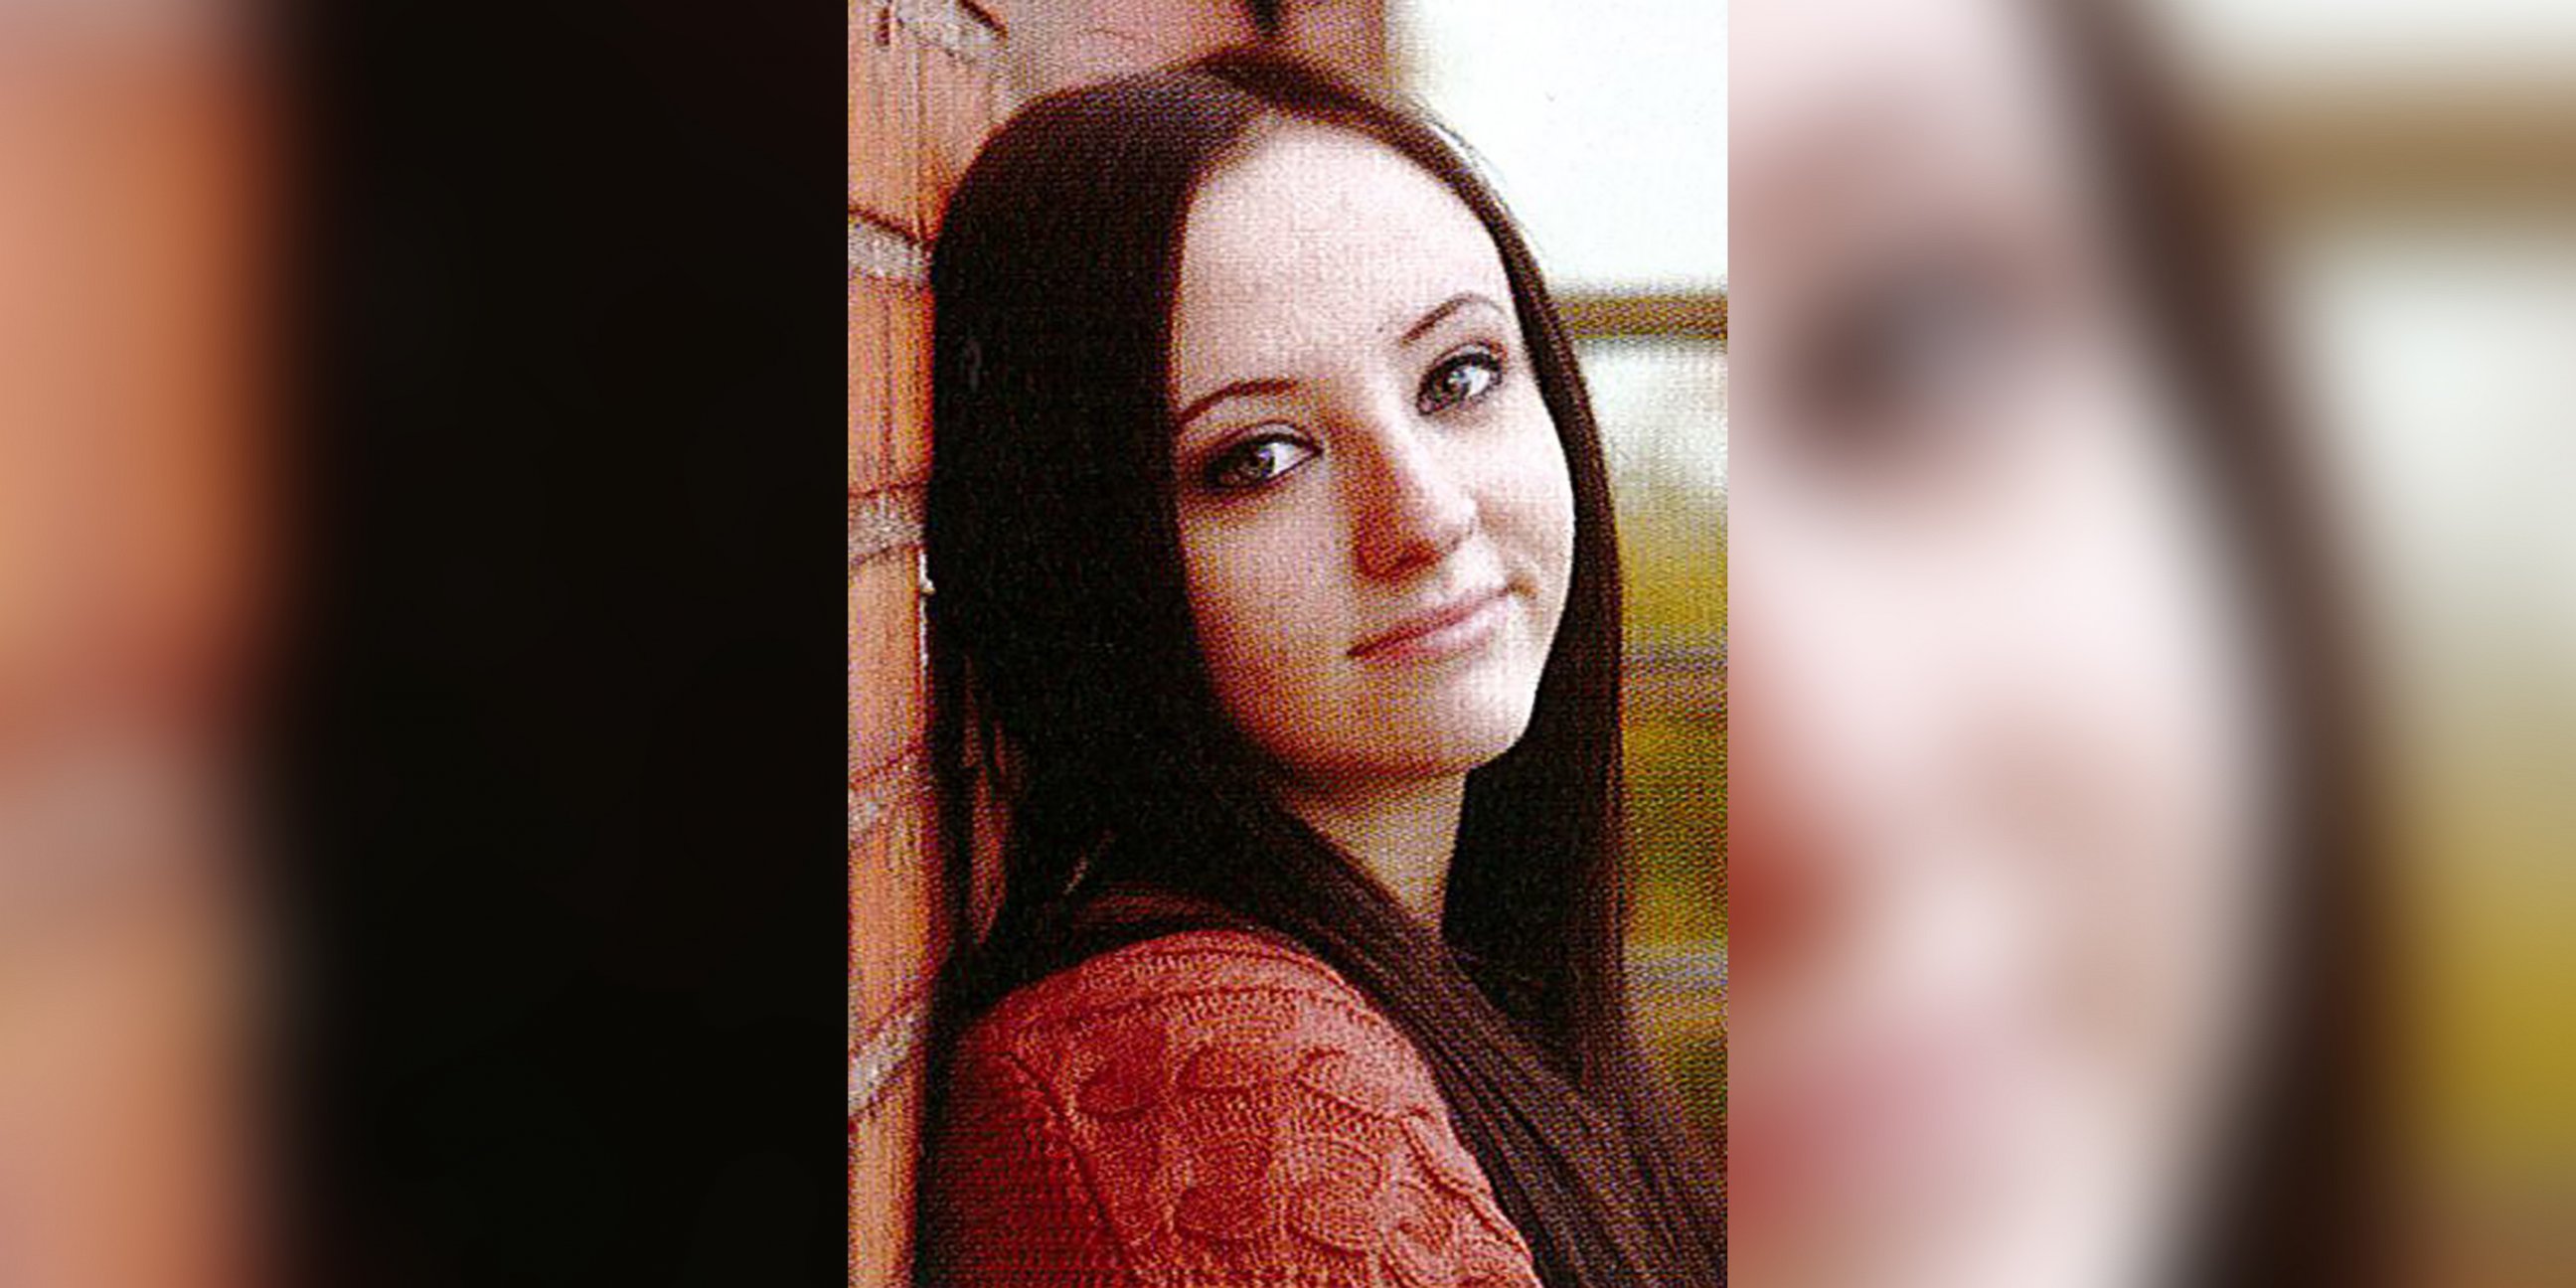 PHOTO: Alyssa Elsman is pictured in an undated handout image from Portage Central High School in Portage, Mich.